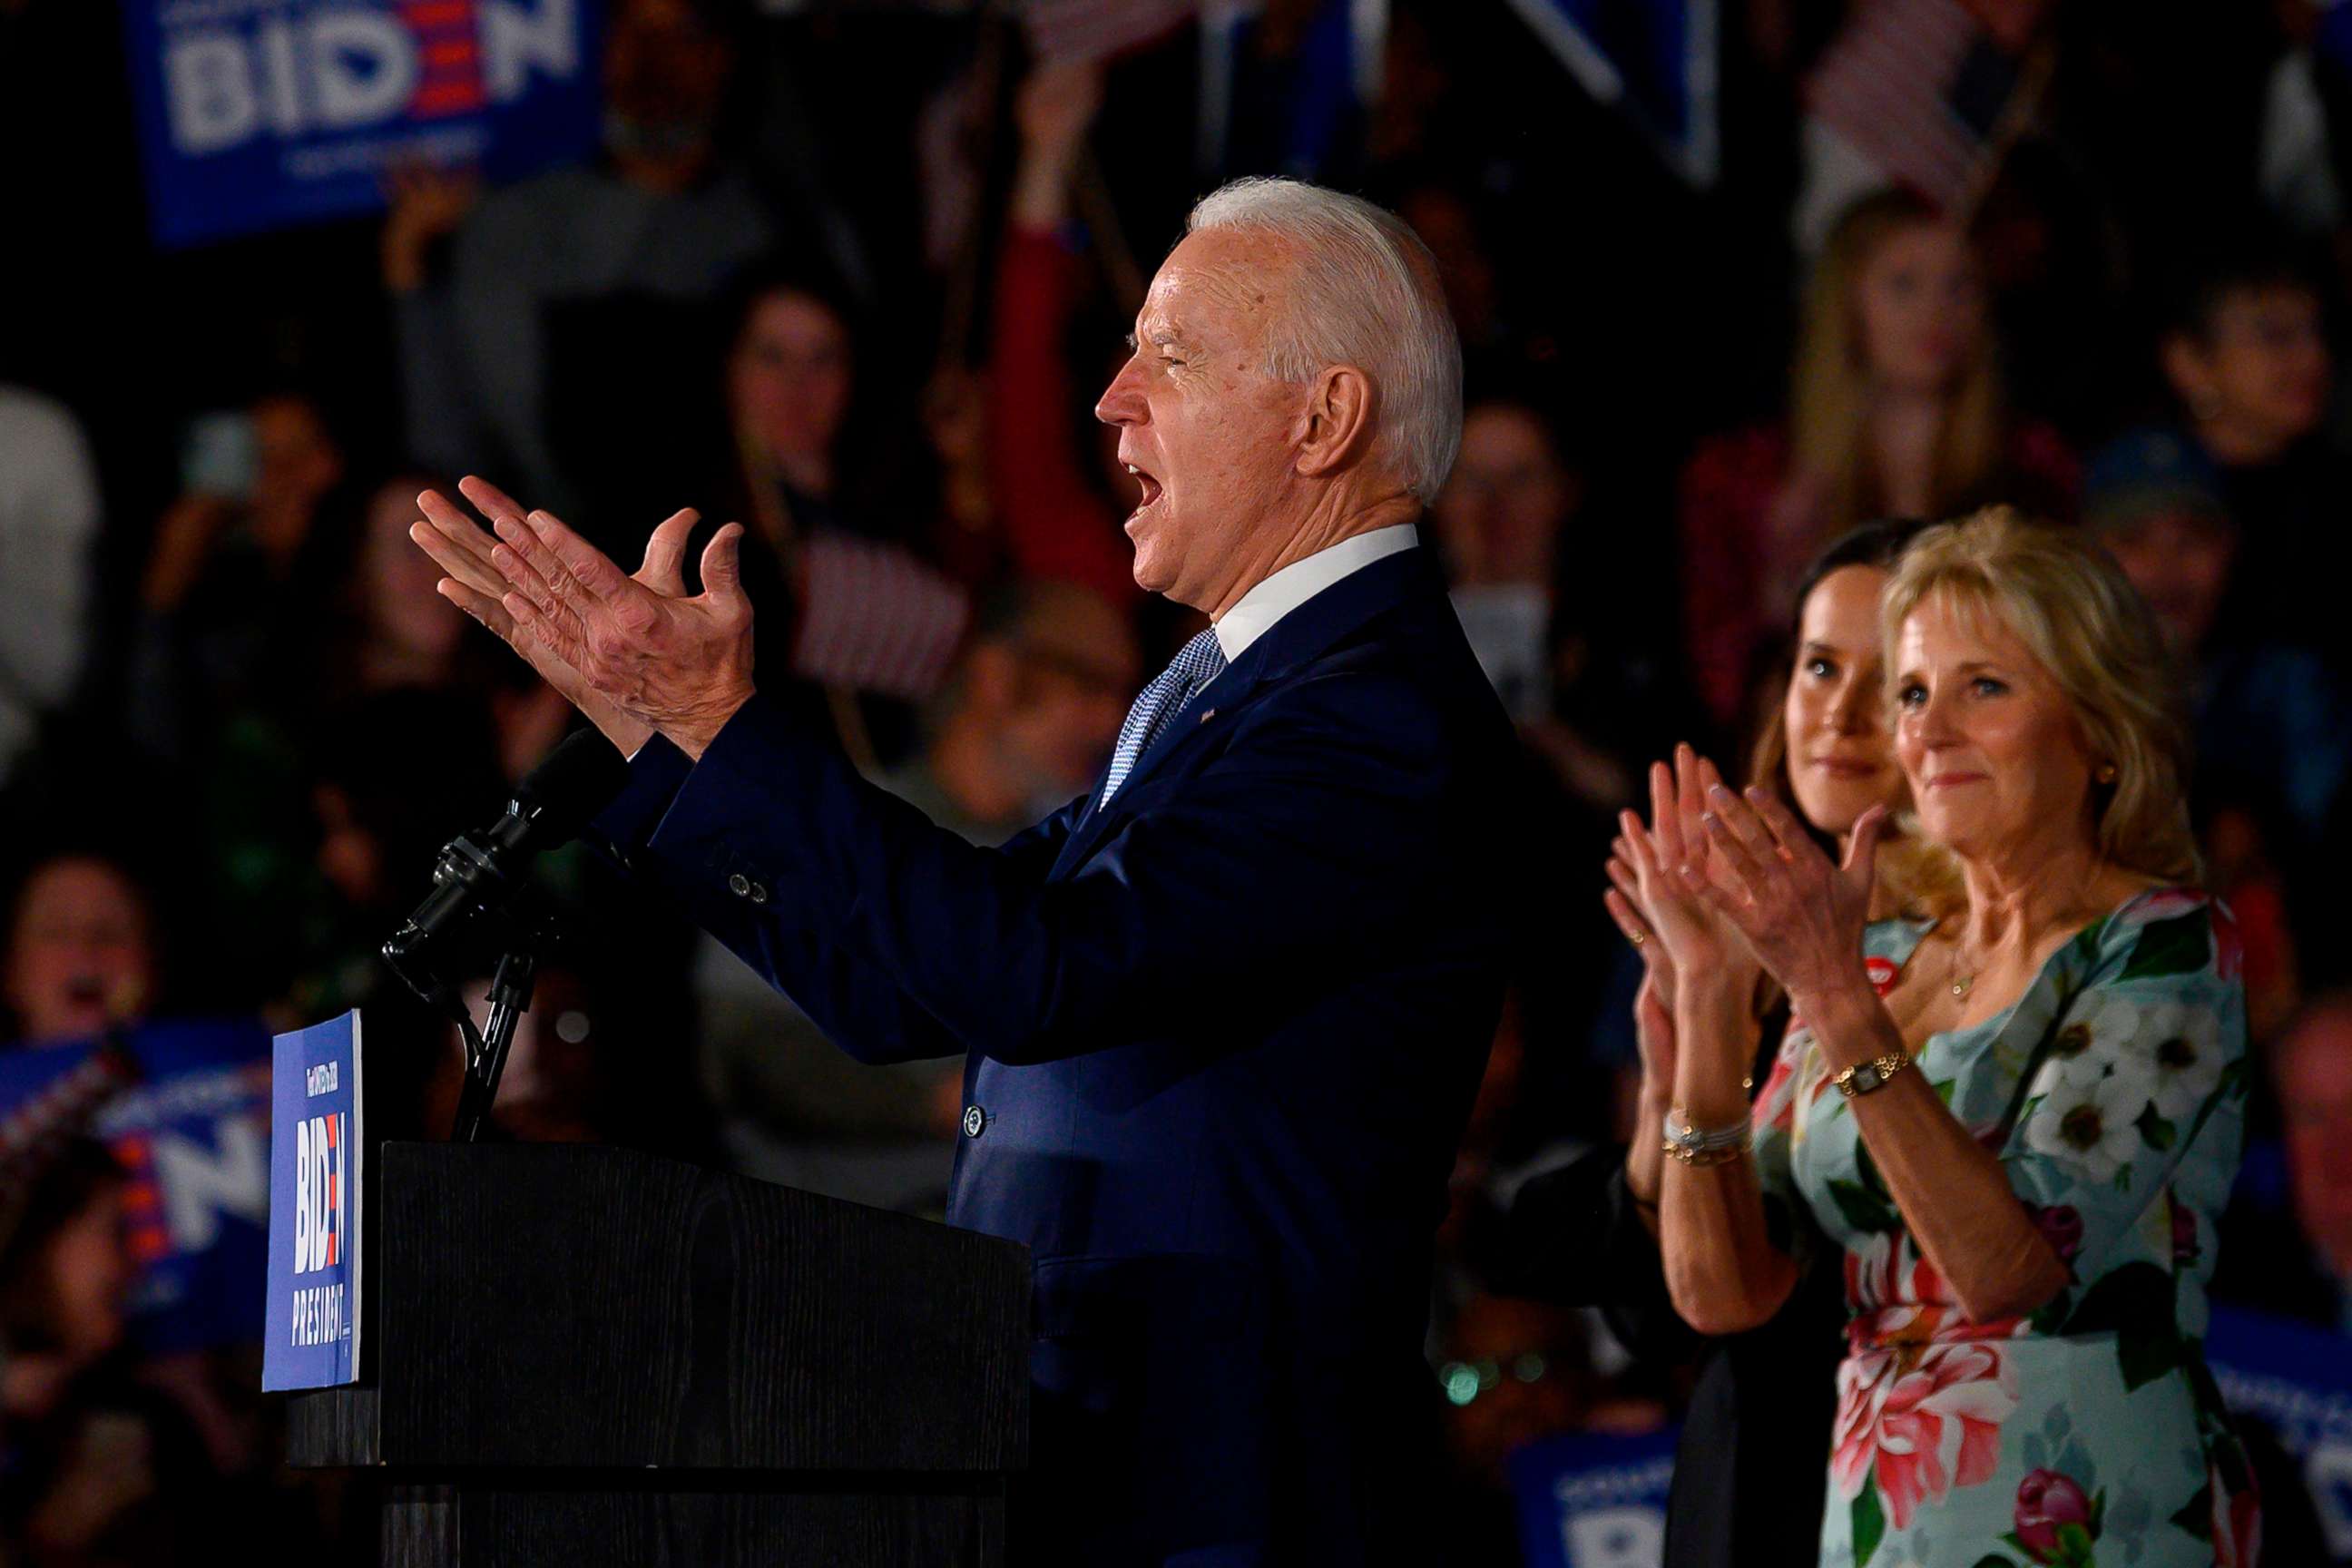 PHOTO: Democratic presidential candidate Joe Biden delivers remarks at his primary night election event in Columbia, S.C., Feb. 29, 2020.